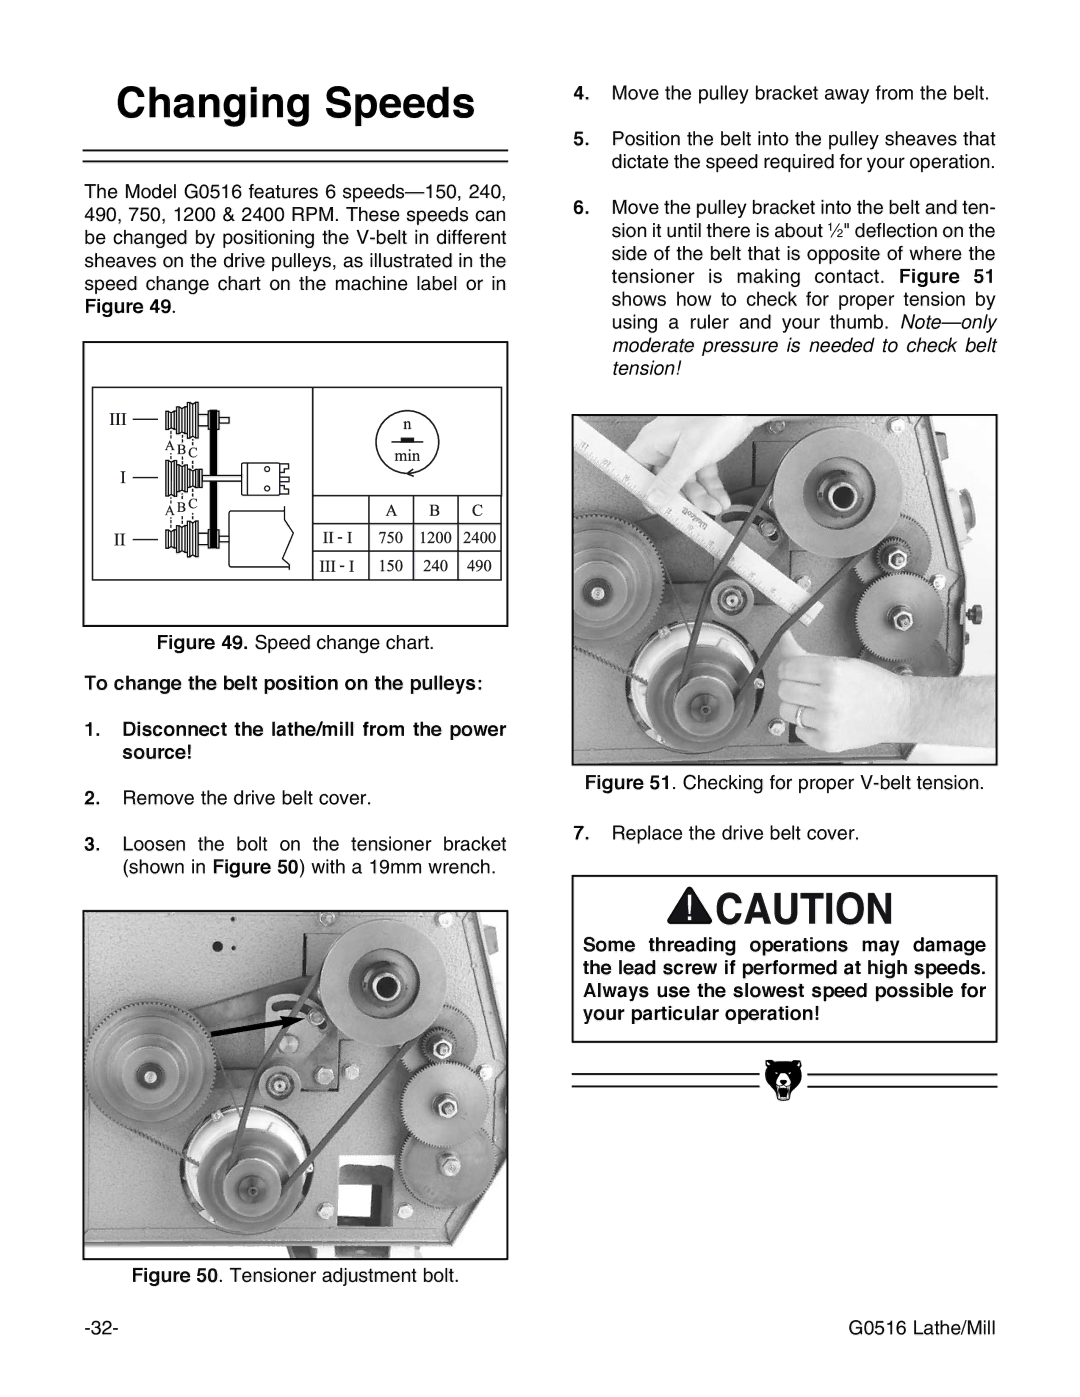 Grizzly G0516 instruction manual Changing Speeds, Speed change chart 